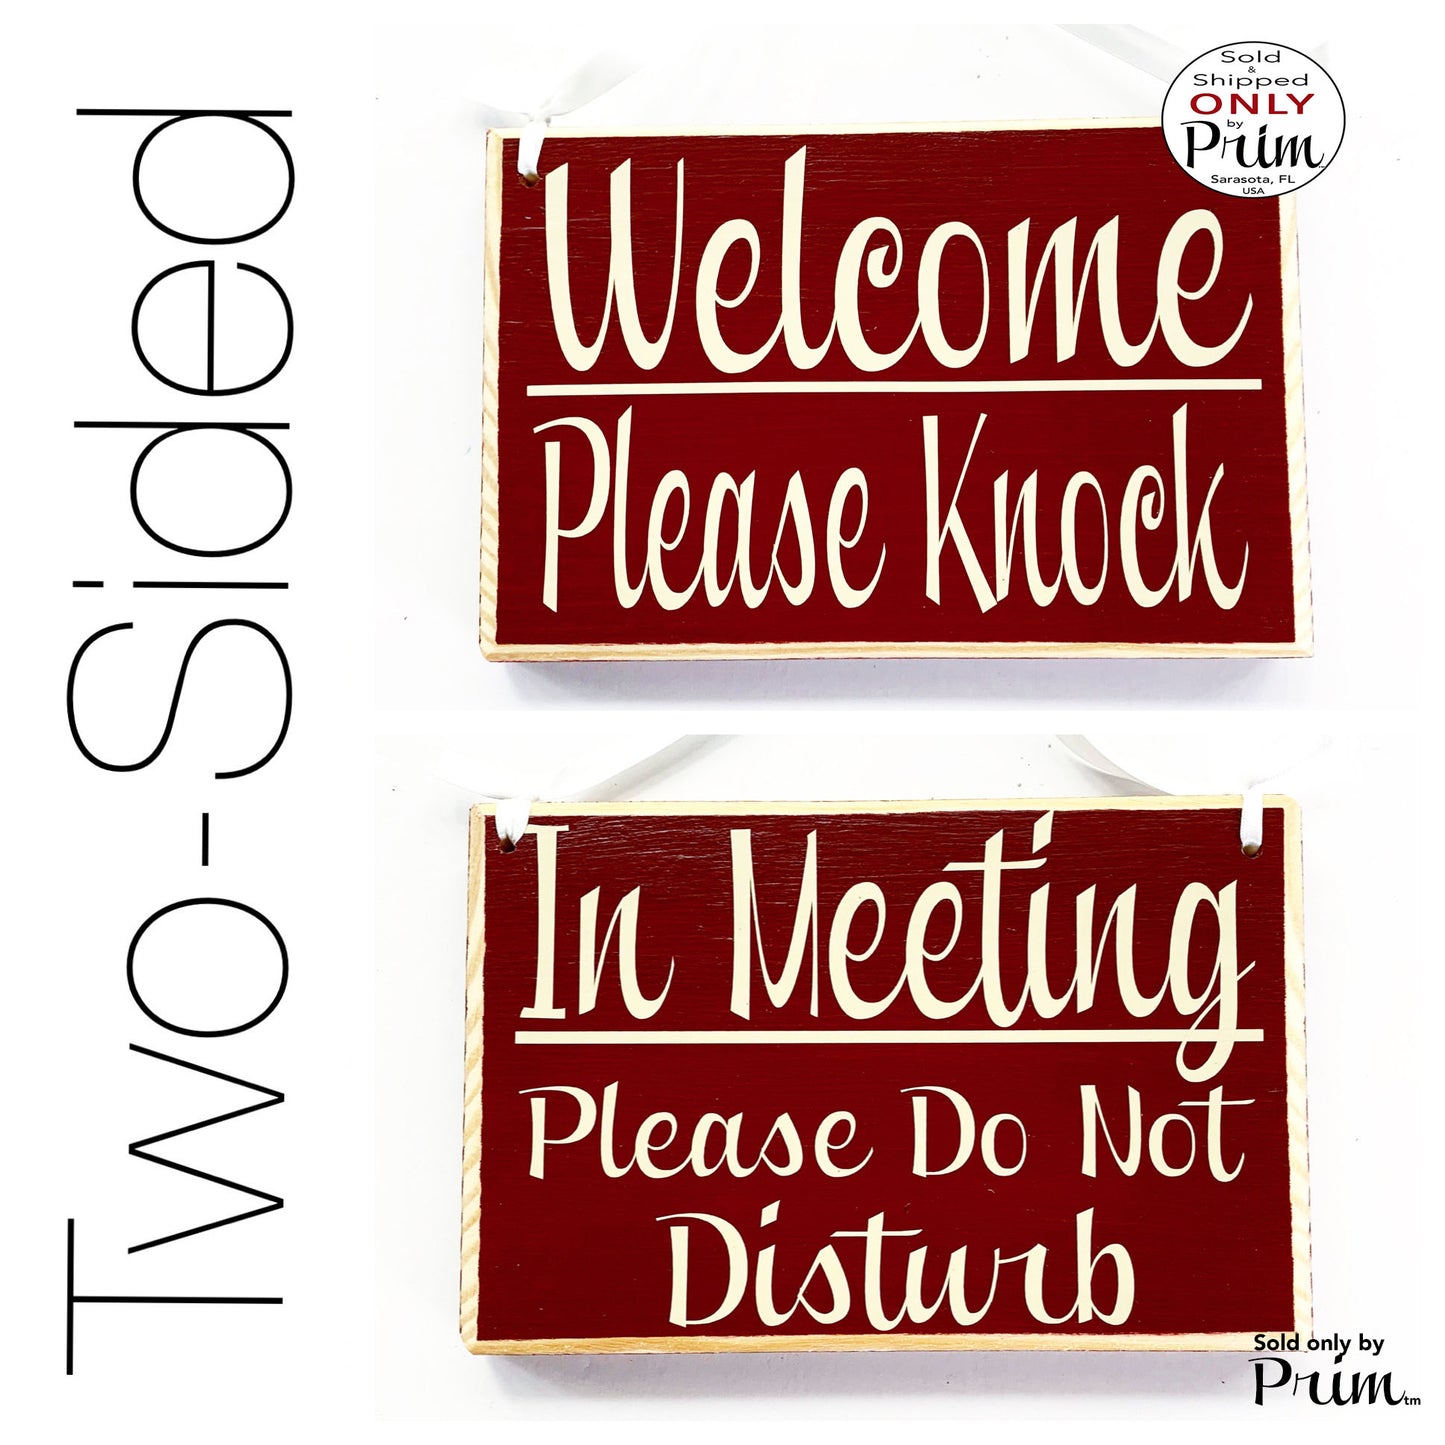 Two Sided 8x6 In Meeting Please Do Not Disturb Welcome Please Knock Custom Wood Sign Session Spa Salon Office Door Hanger Plaque Designs by Prim